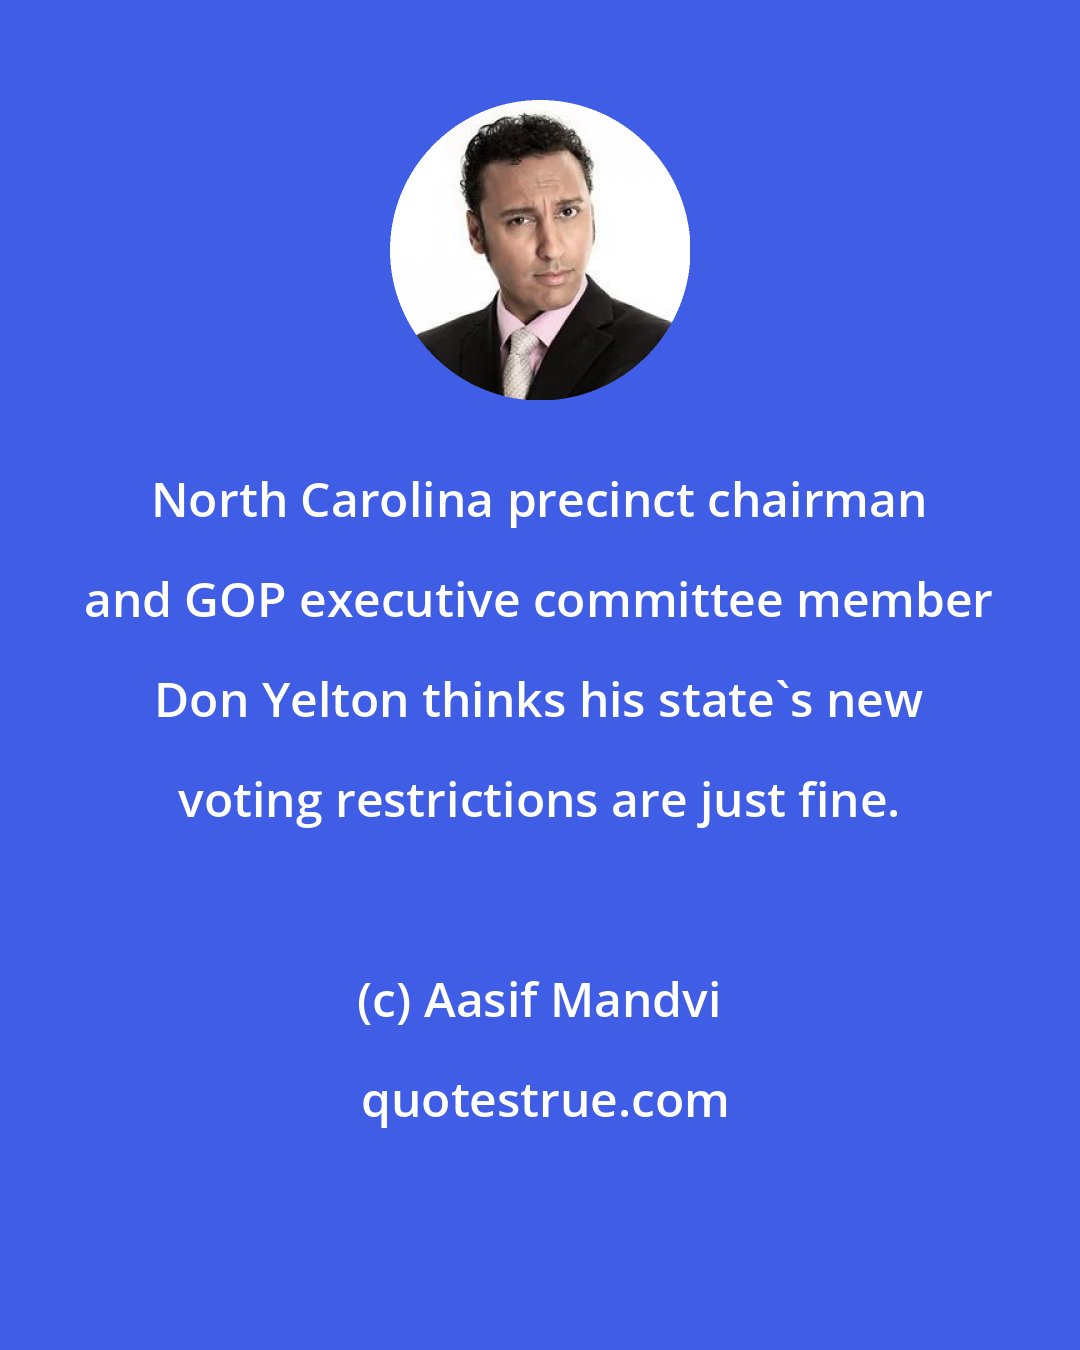 Aasif Mandvi: North Carolina precinct chairman and GOP executive committee member Don Yelton thinks his state's new voting restrictions are just fine.